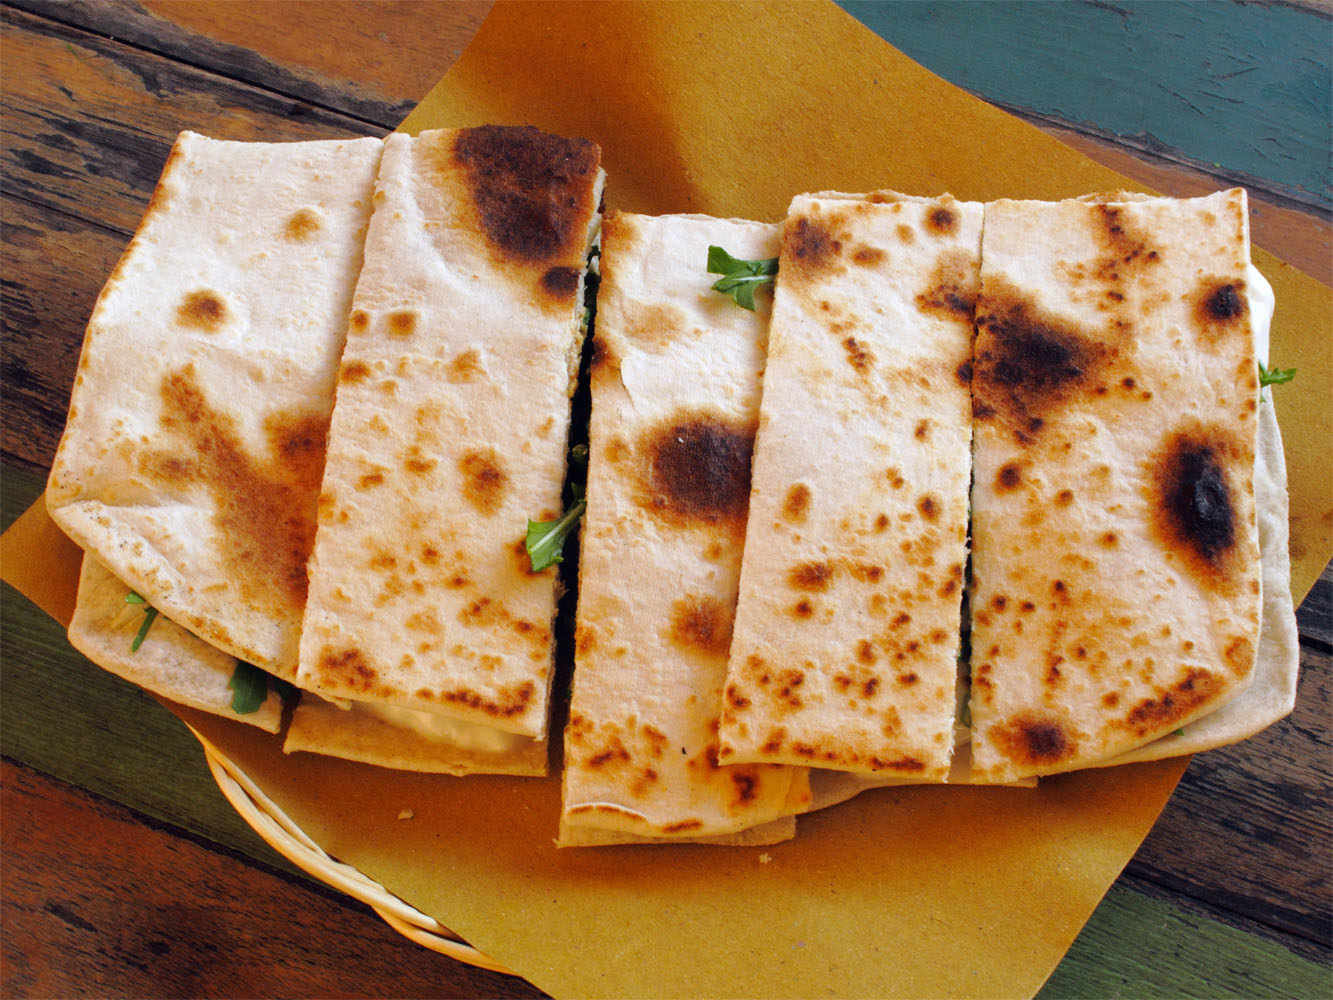 Piadina lends itself perfectly to processed and cured meats